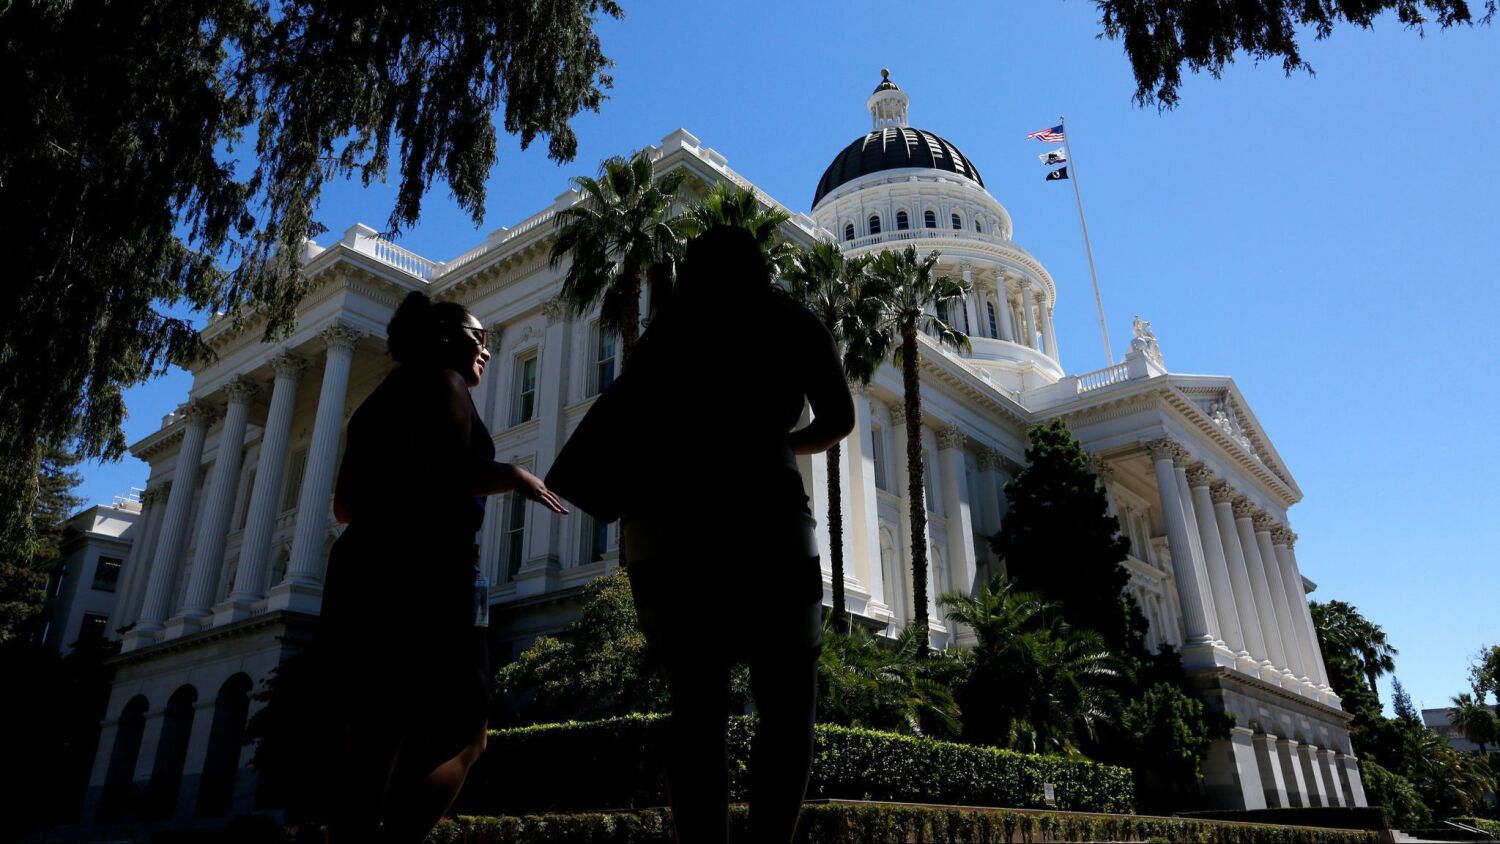 California Assembly members not vaccinated against COVID-19 should be suspended, lawmaker says